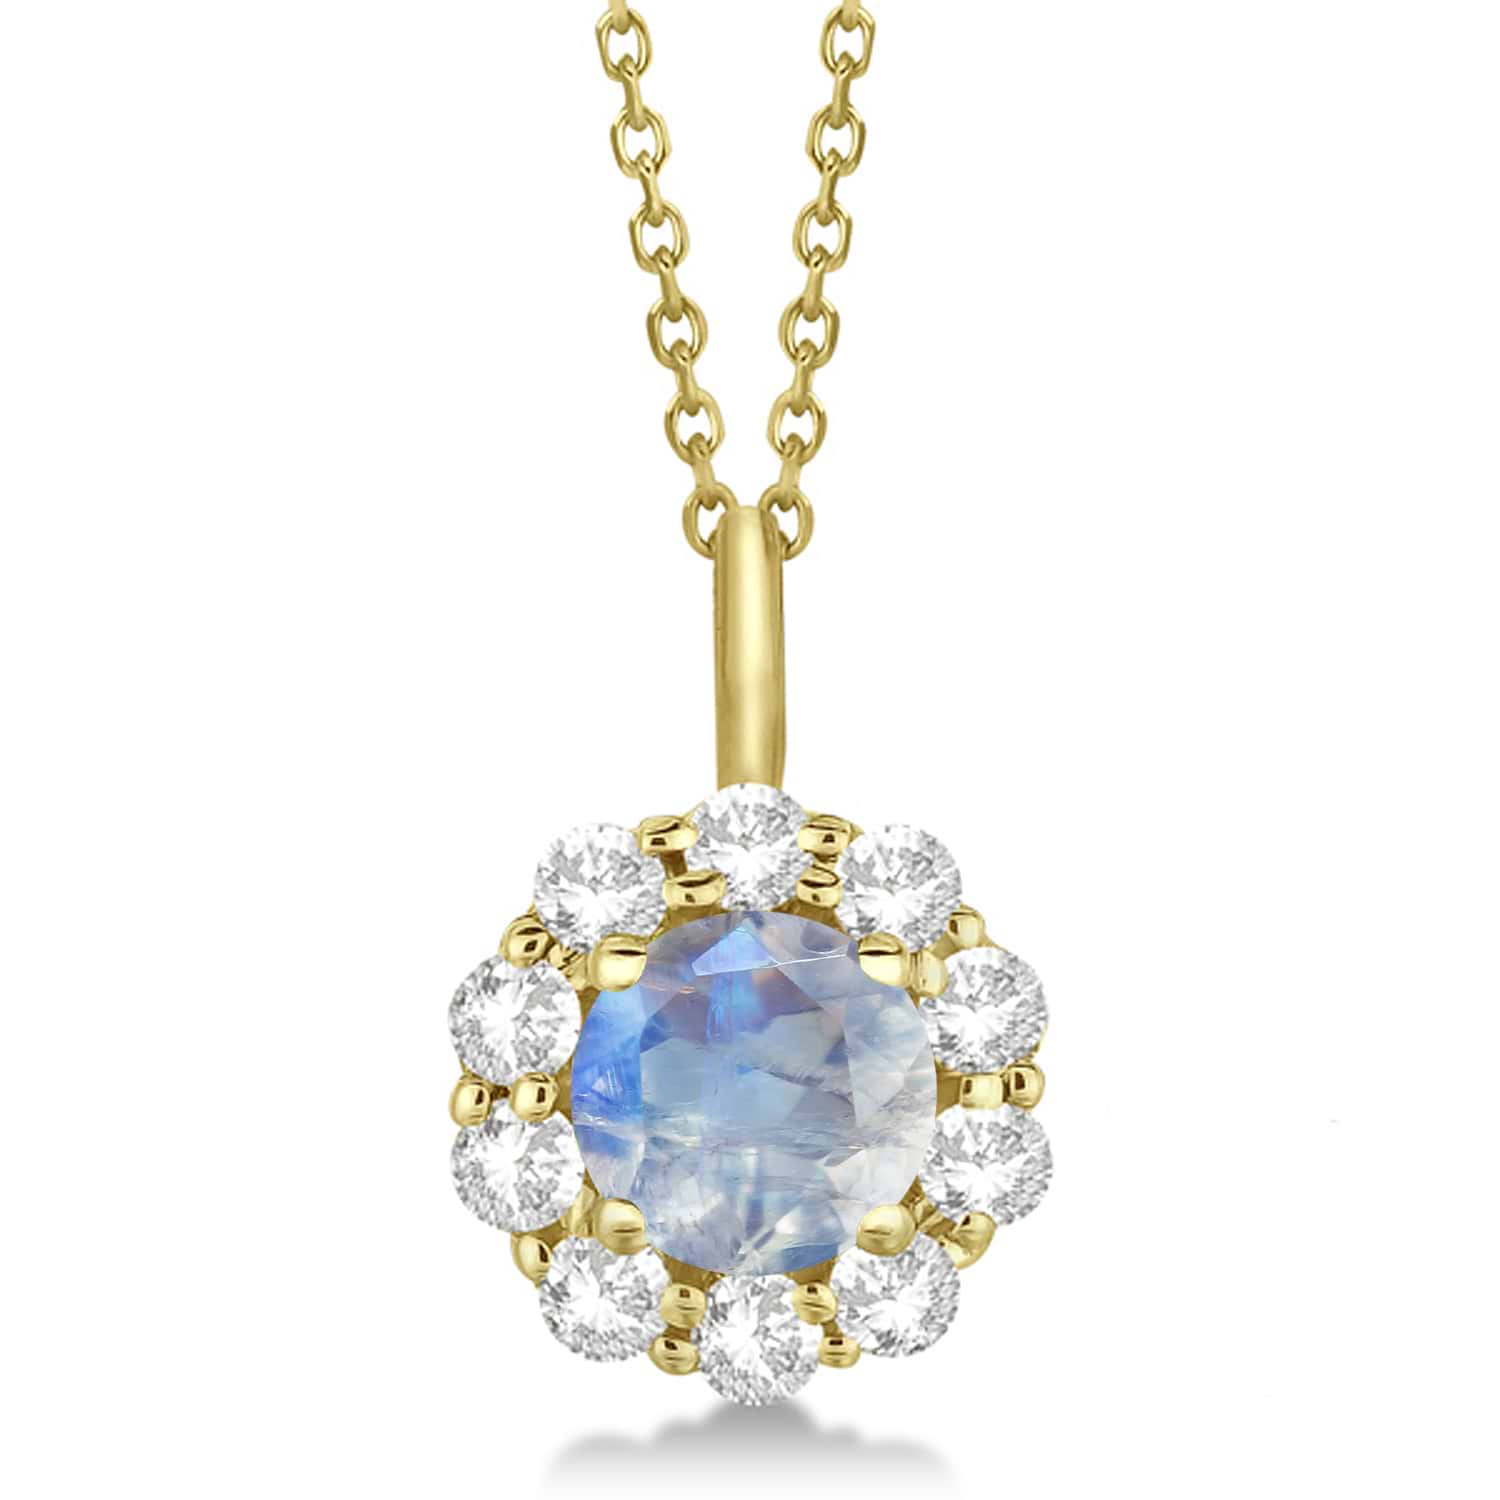 Halo Diamond and Moonstone Lady Di Pendant Necklace 18k Yellow Gold (1.69ct)